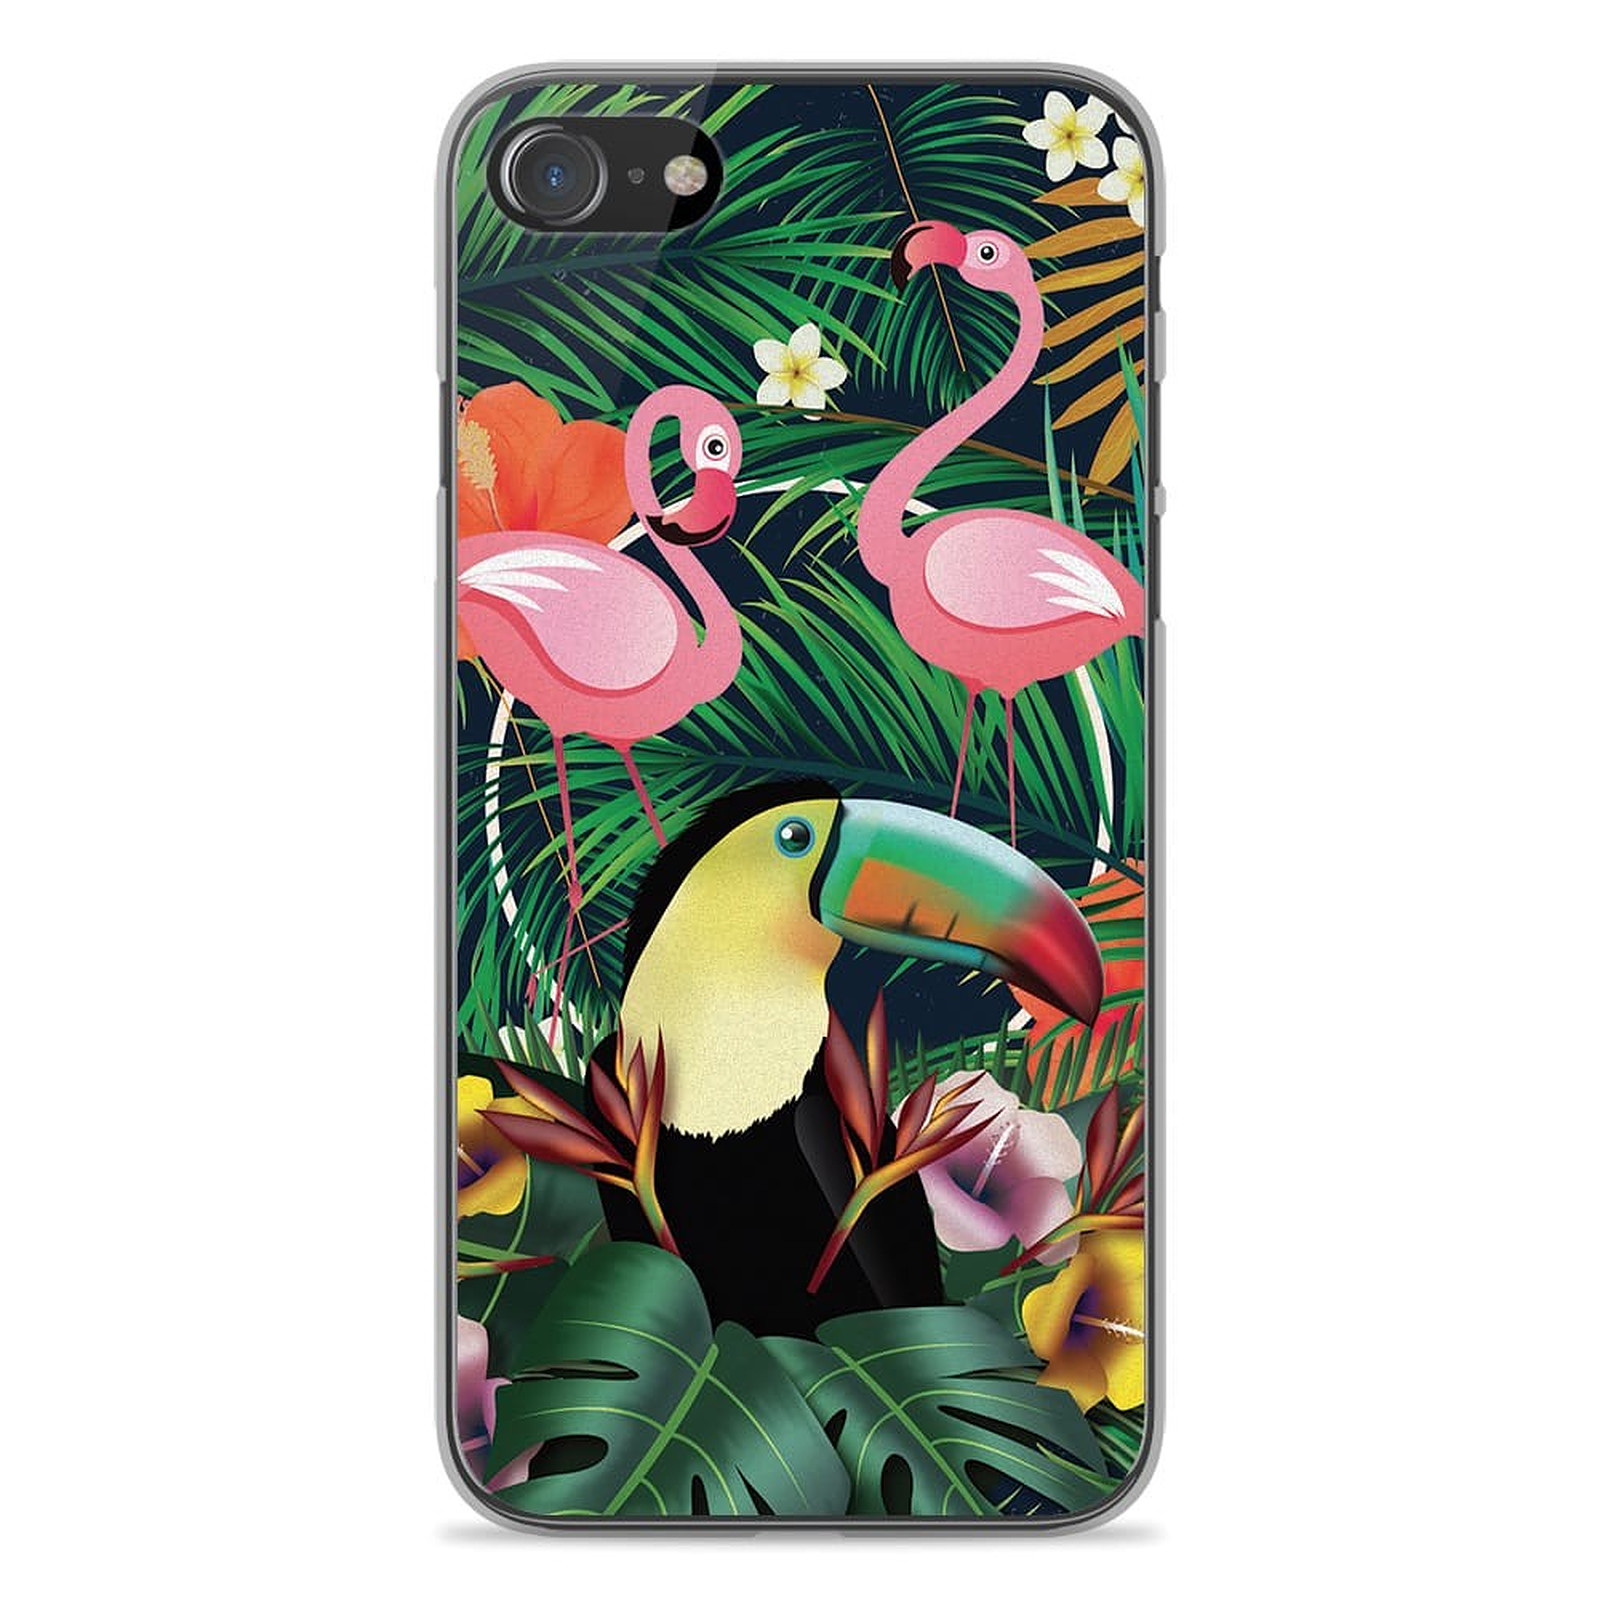 1001 Coques Coque silicone gel Apple iPhone SE 2020 motif Tropical Toucan - Coque telephone 1001Coques